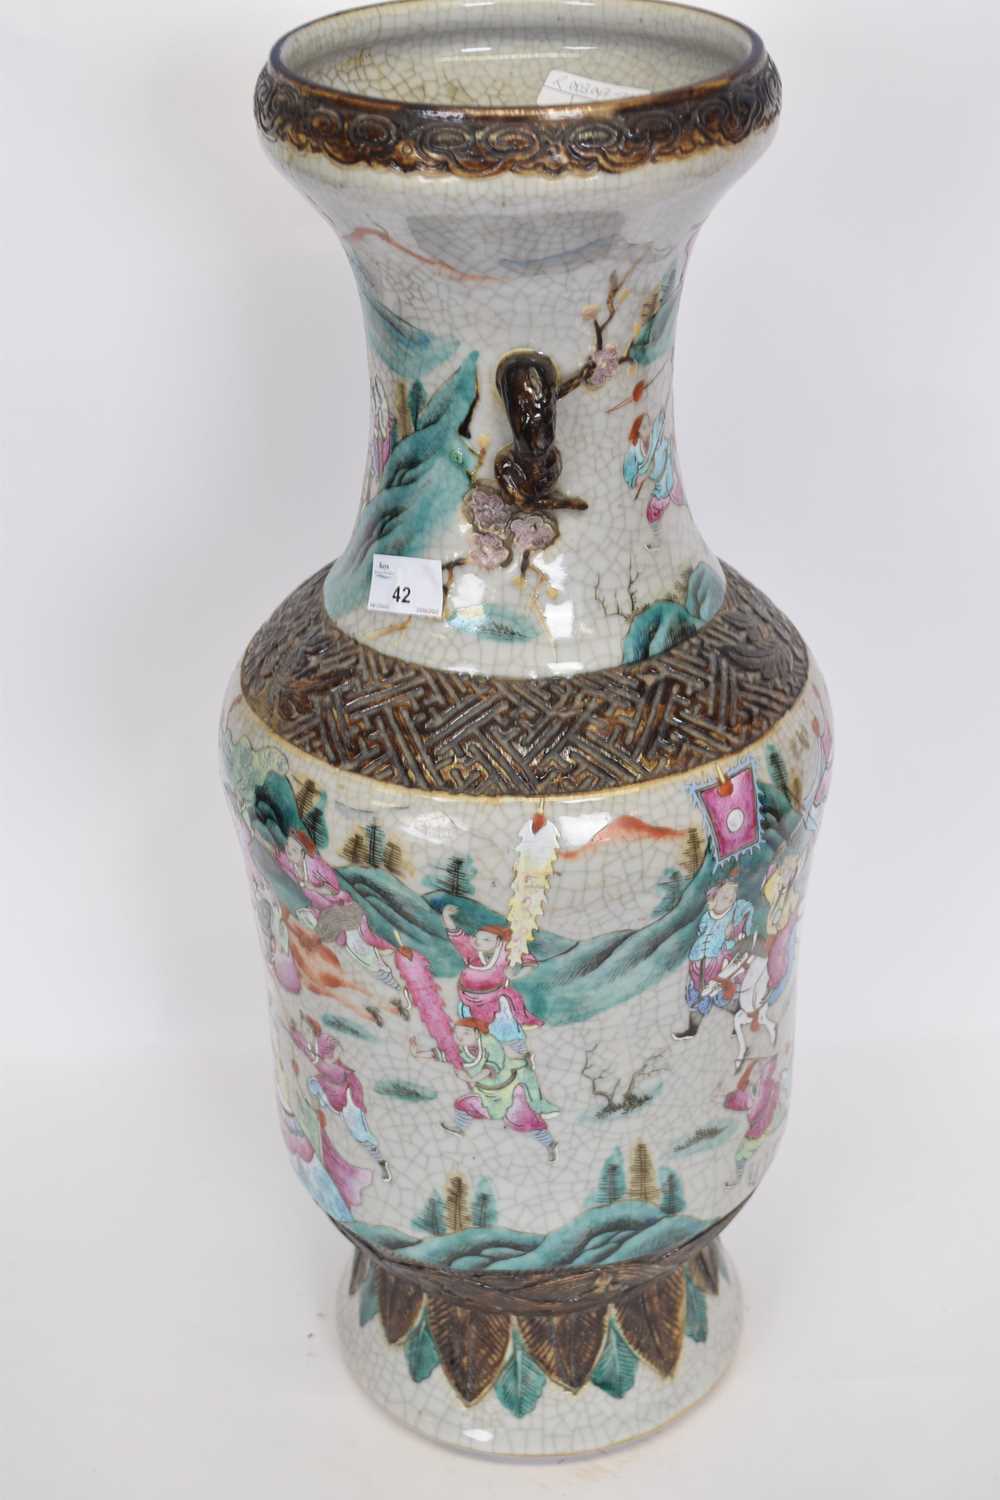 Chinese Crackle Ware Vase - Image 2 of 3